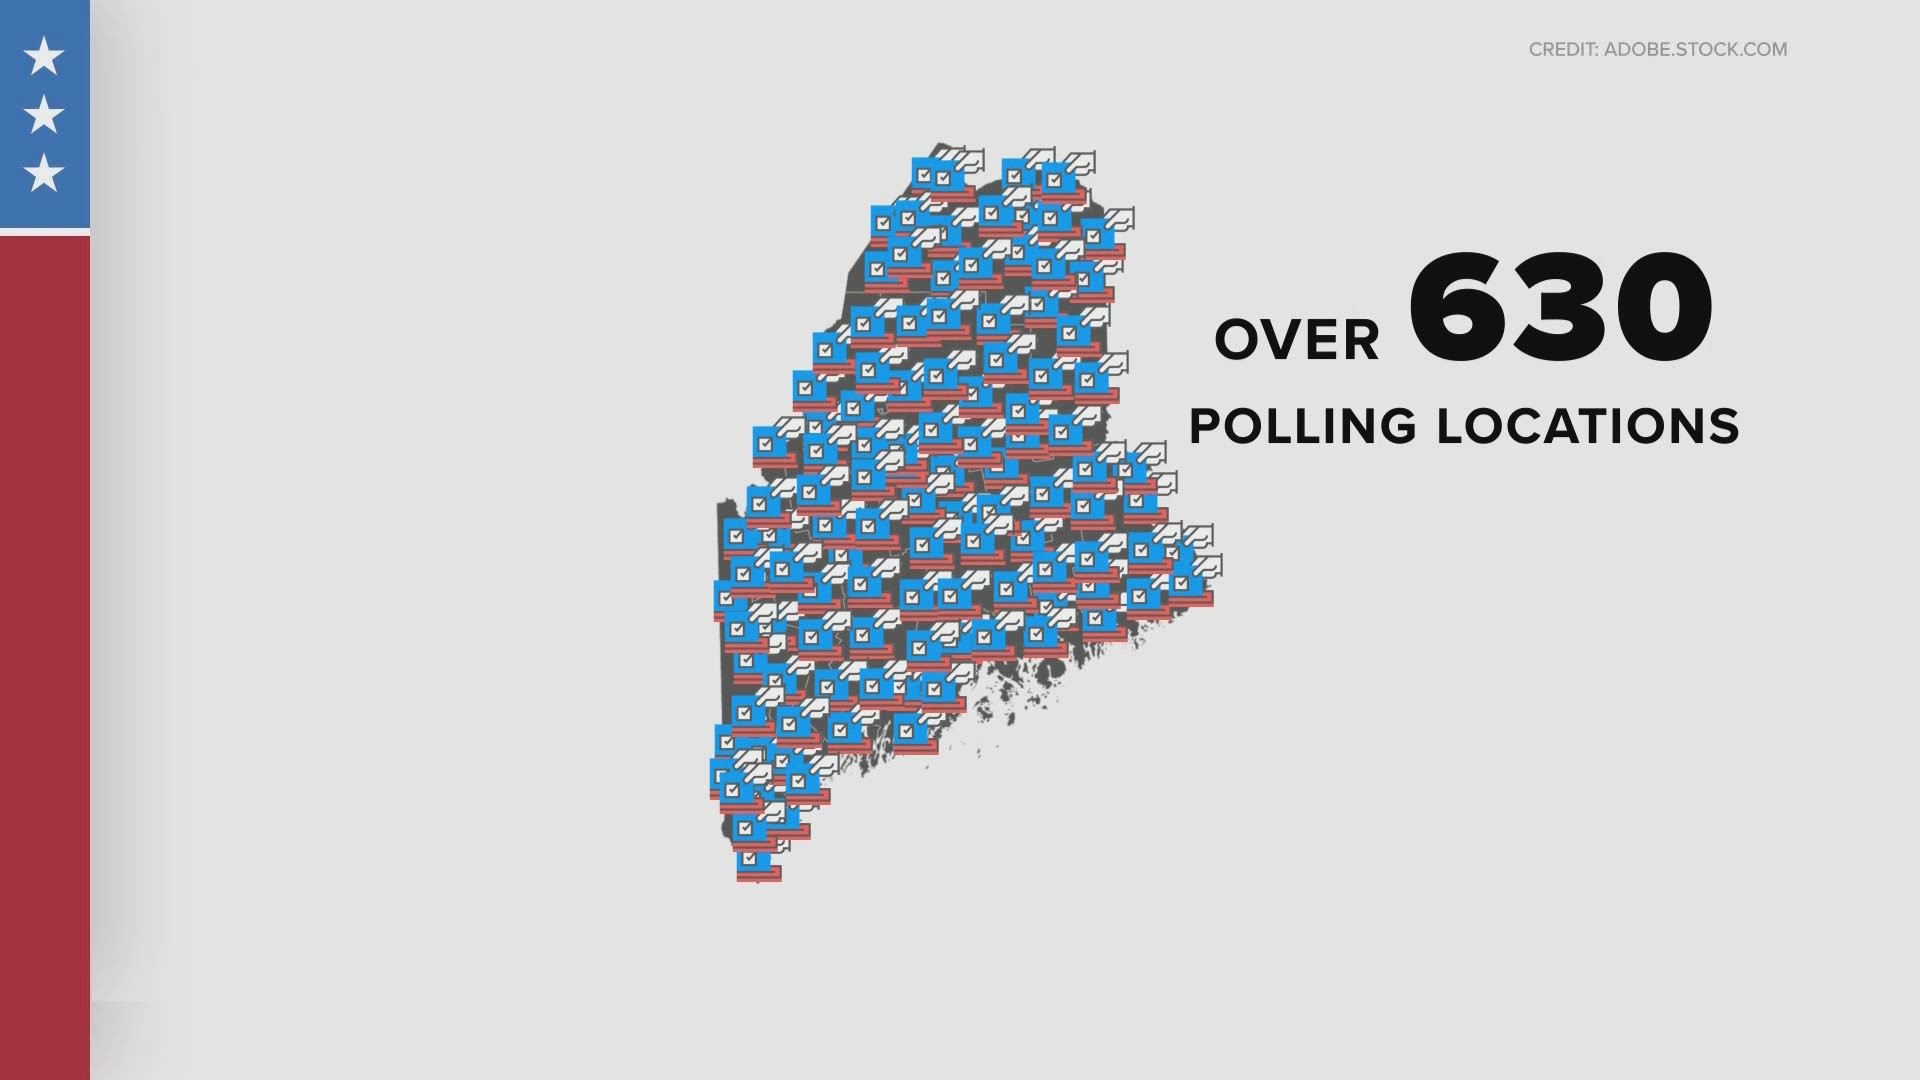 The ongoing pandemic has made some changes to polling locations around Maine.